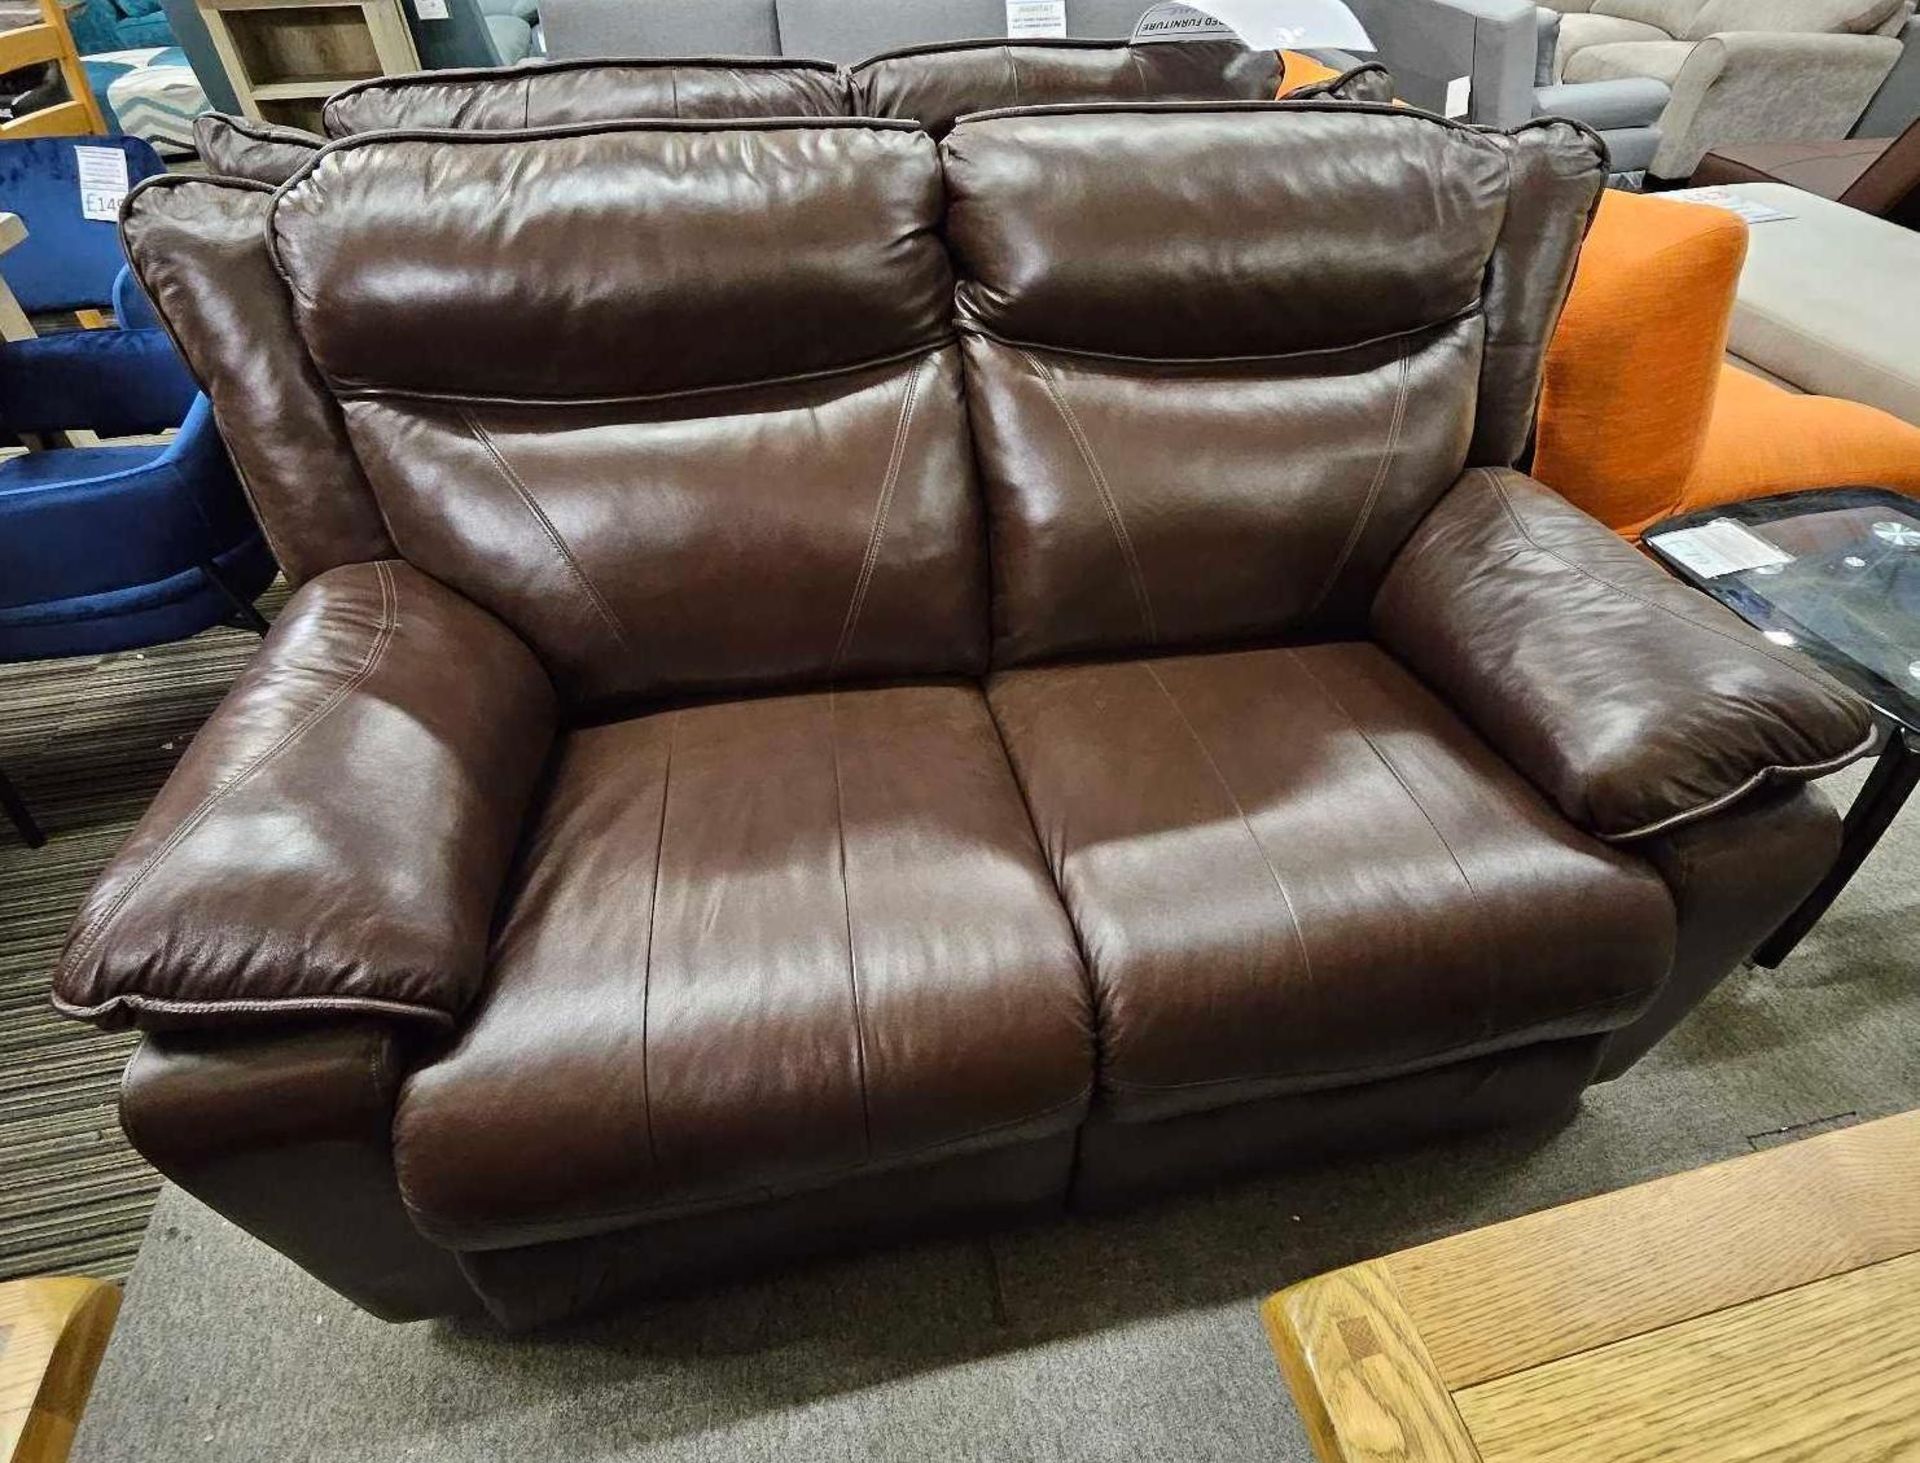 *EX DISPLAY* Santa fe 2 + 2 seater sofa in chocolate brown full leather. - Image 2 of 8